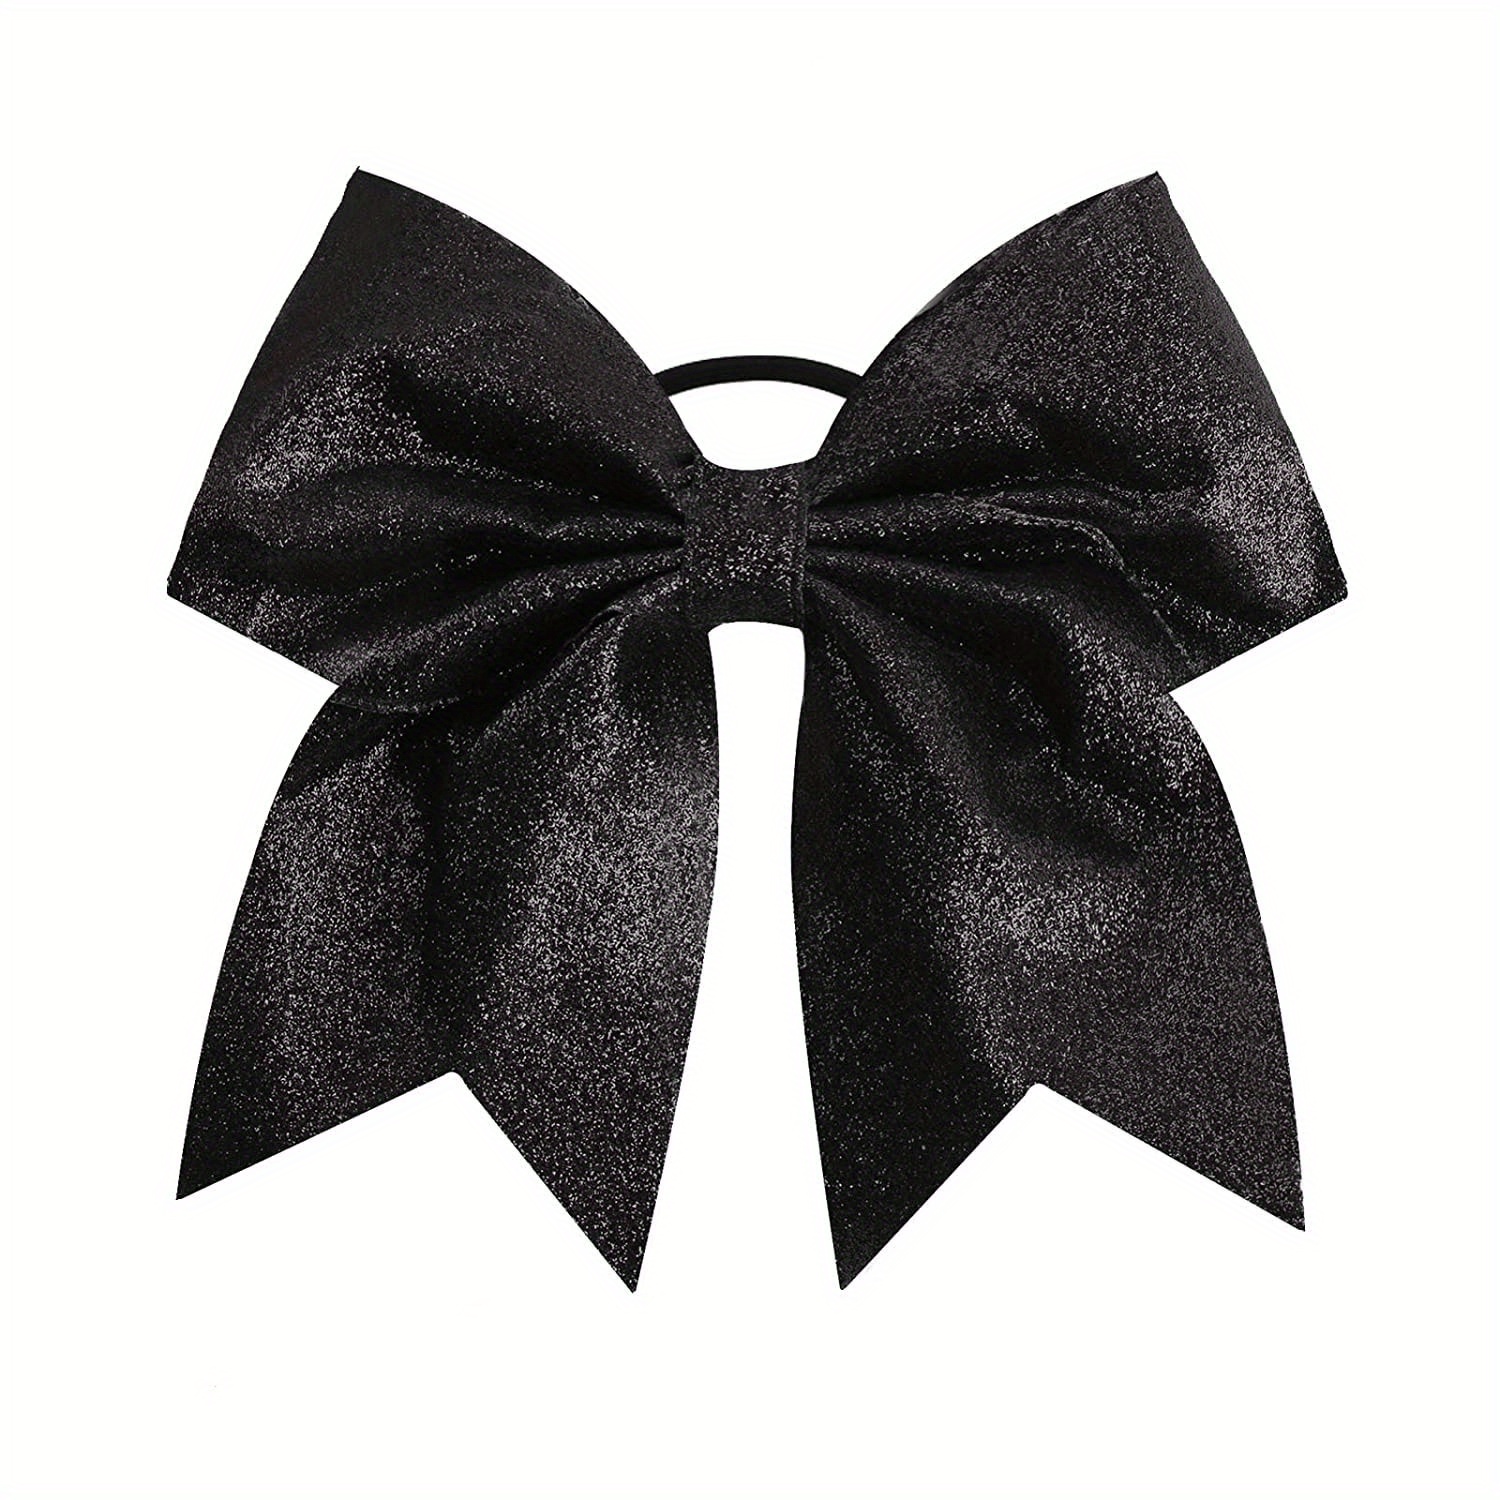 Cheer Bows White Cheerleading Softball - Gifts for Girls and Women Team Bow  with Ponytail Holder Complete your Cheerleader Outfit Uniform Strong Hair